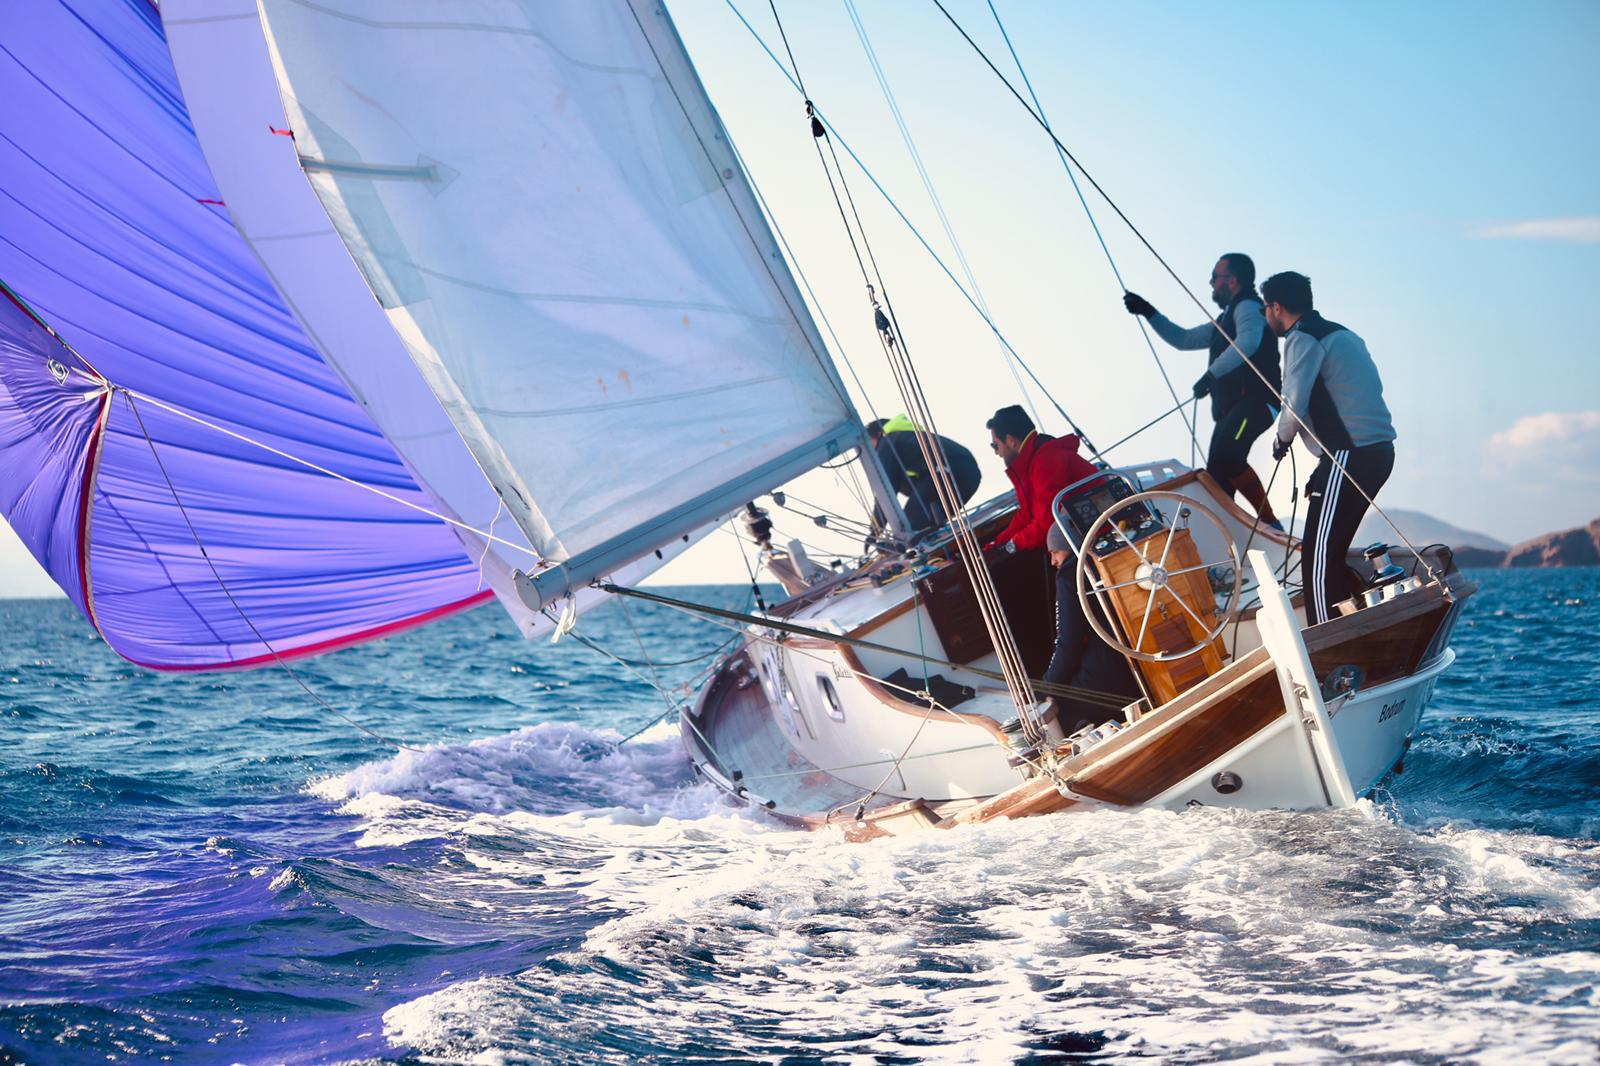 The Tirhandil Cup: The Oldest Treasures Race In Bodrum